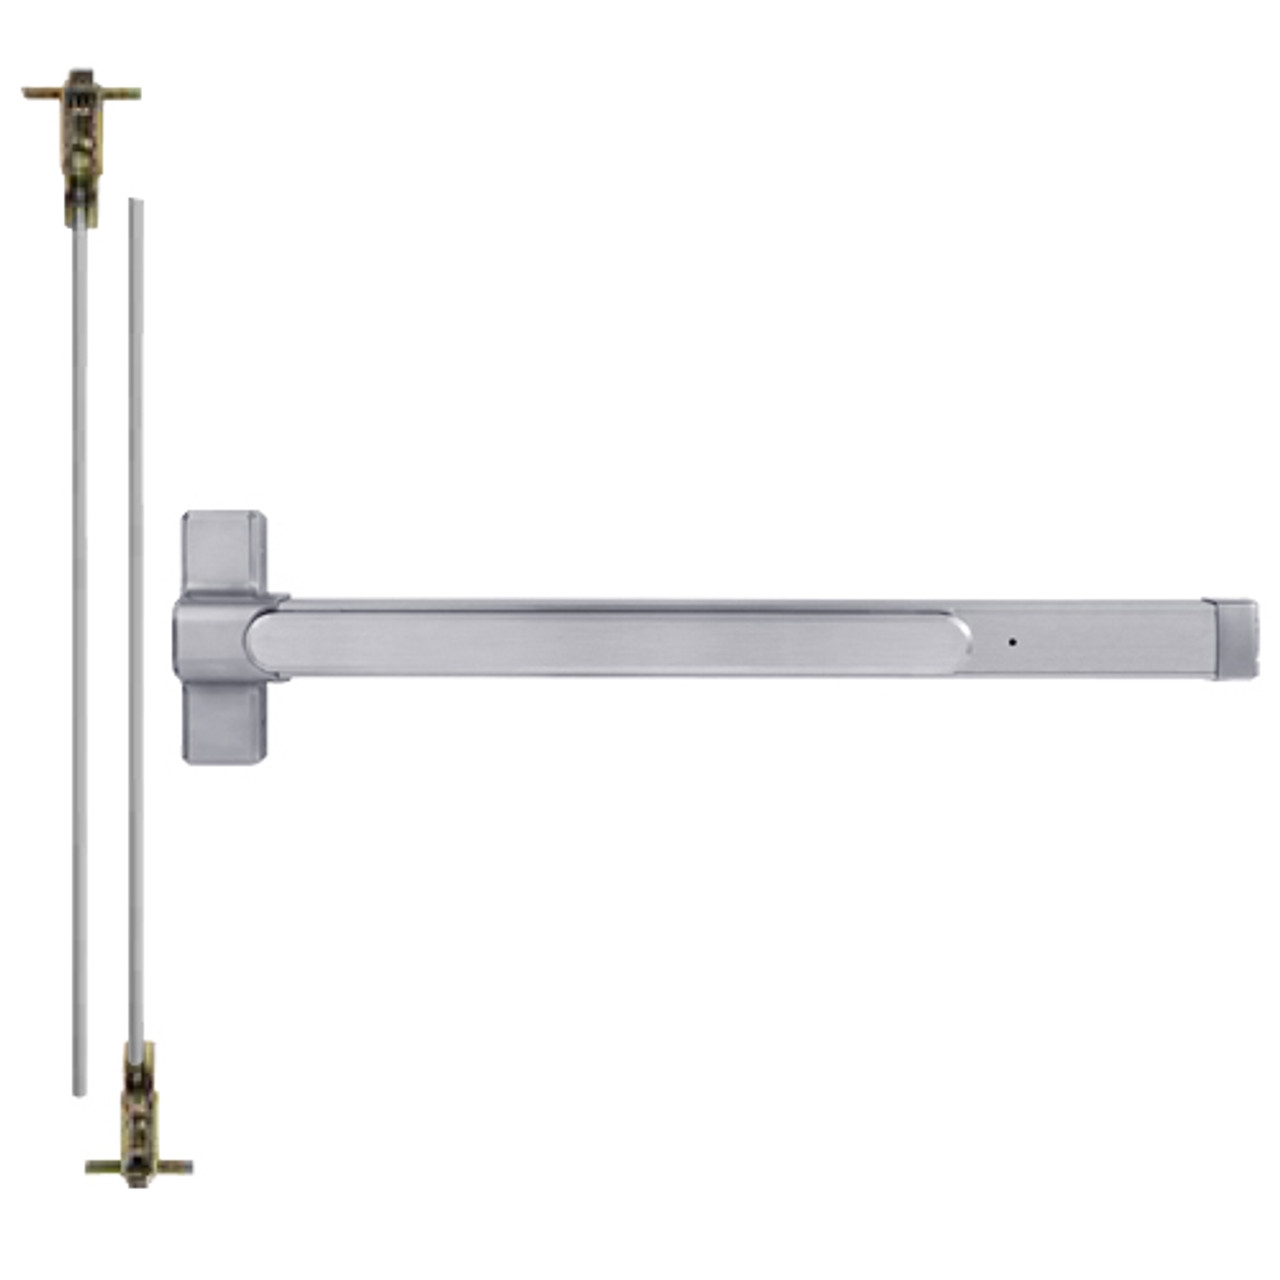 QED126LR-48-8-626 Stanley QED100 Series Heavy Duty Concealed Vertical Rod Fire Rated Exit Device in Satin Chrome Finish